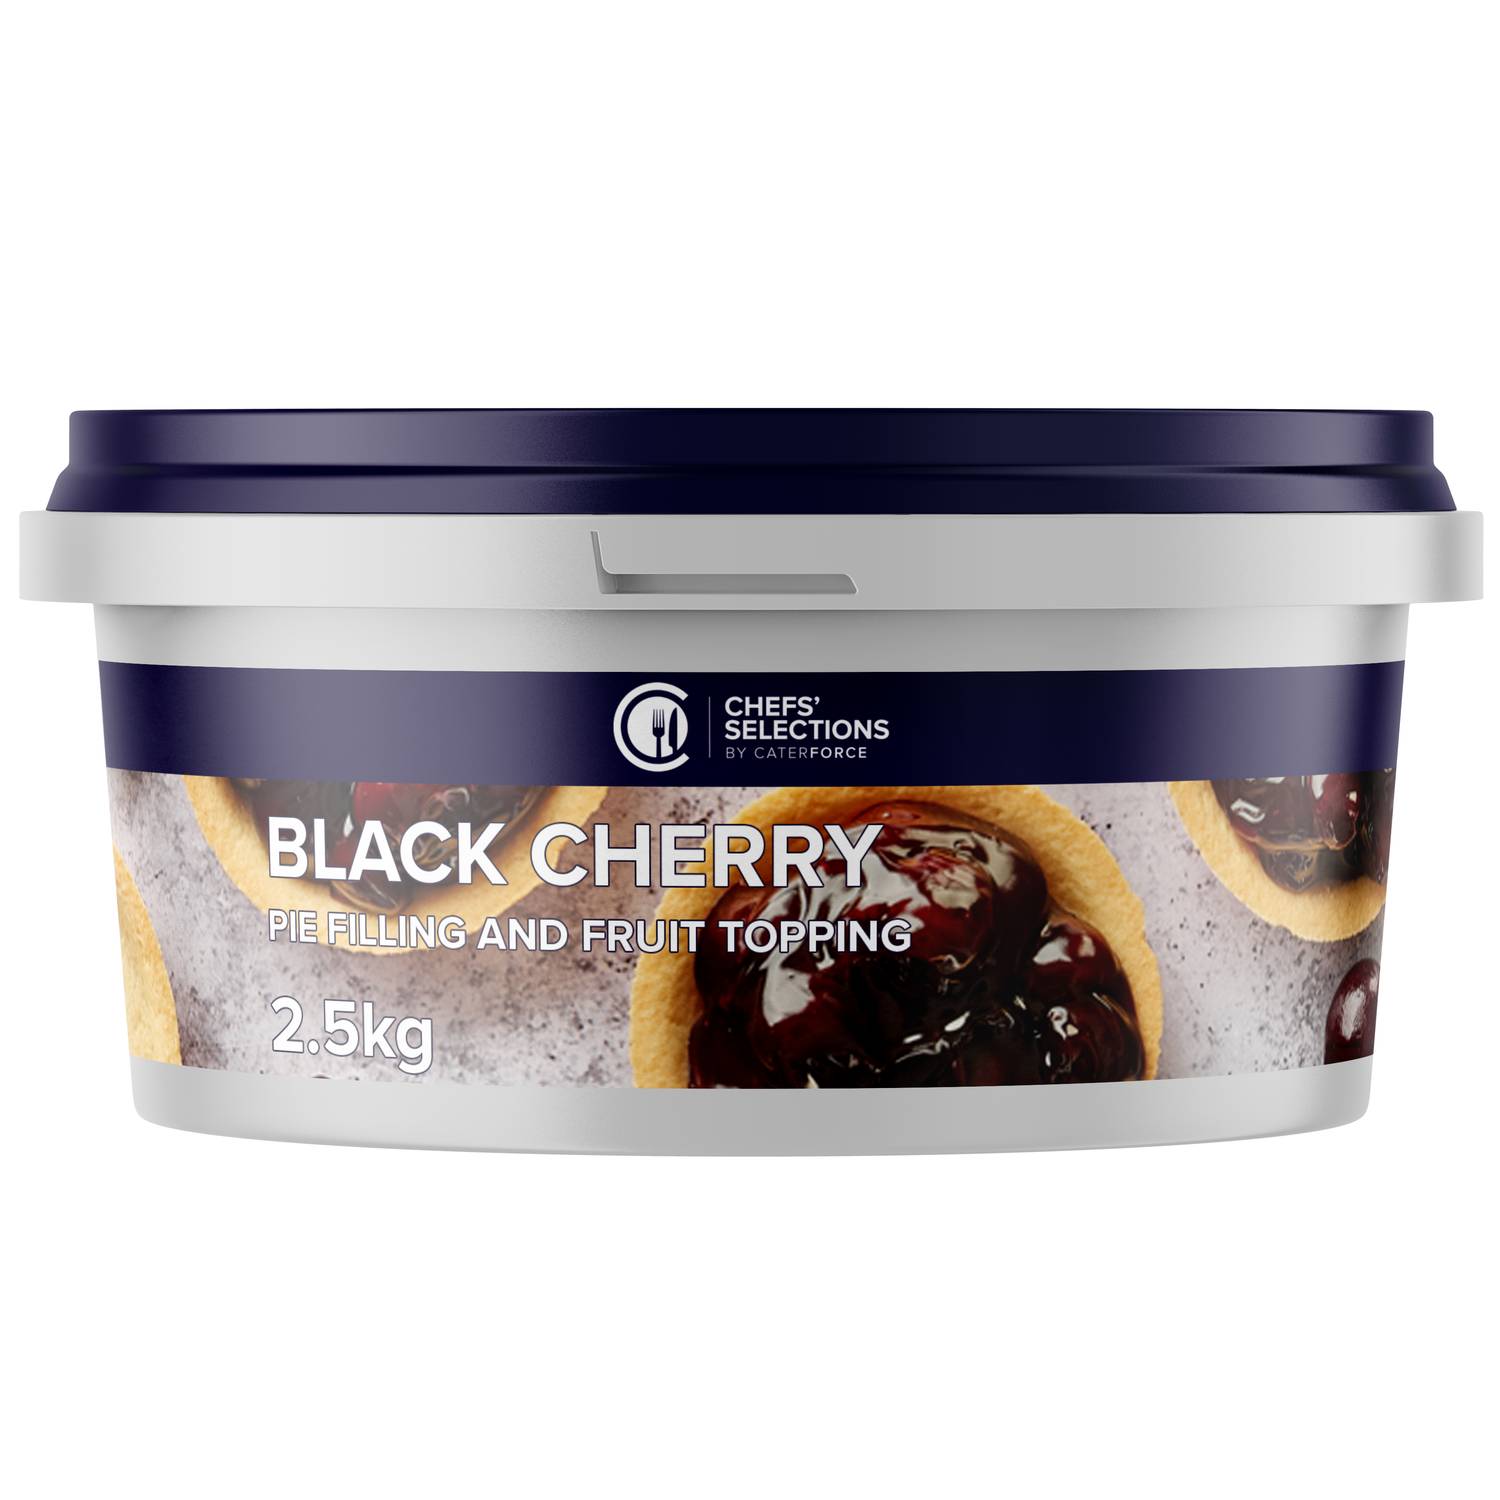 Chefs’ Selections Black Cherry Pie Filling And Fruit Topping (4 x 2.5kg)